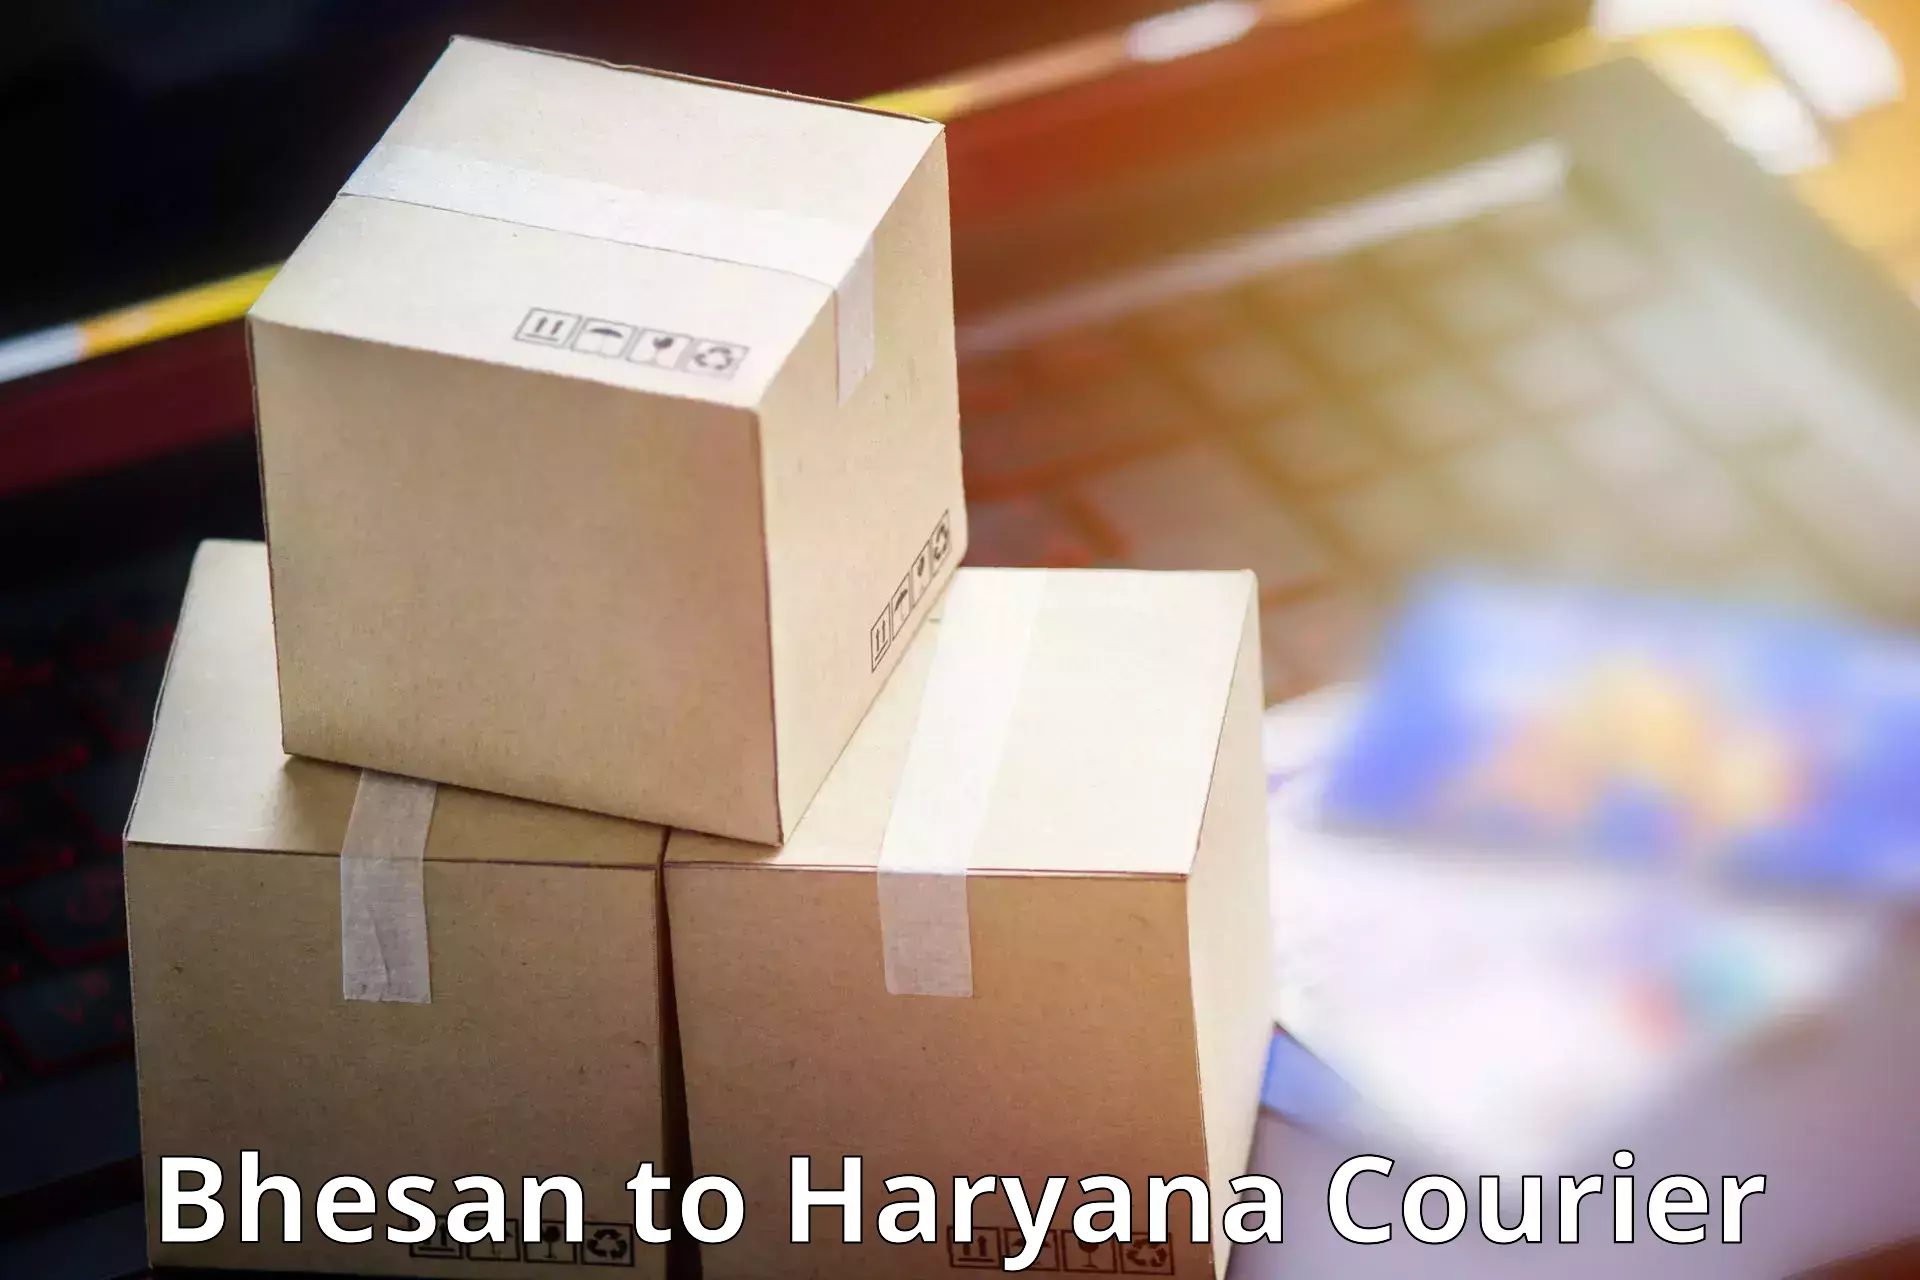 Cost-effective courier options Bhesan to Fatehabad